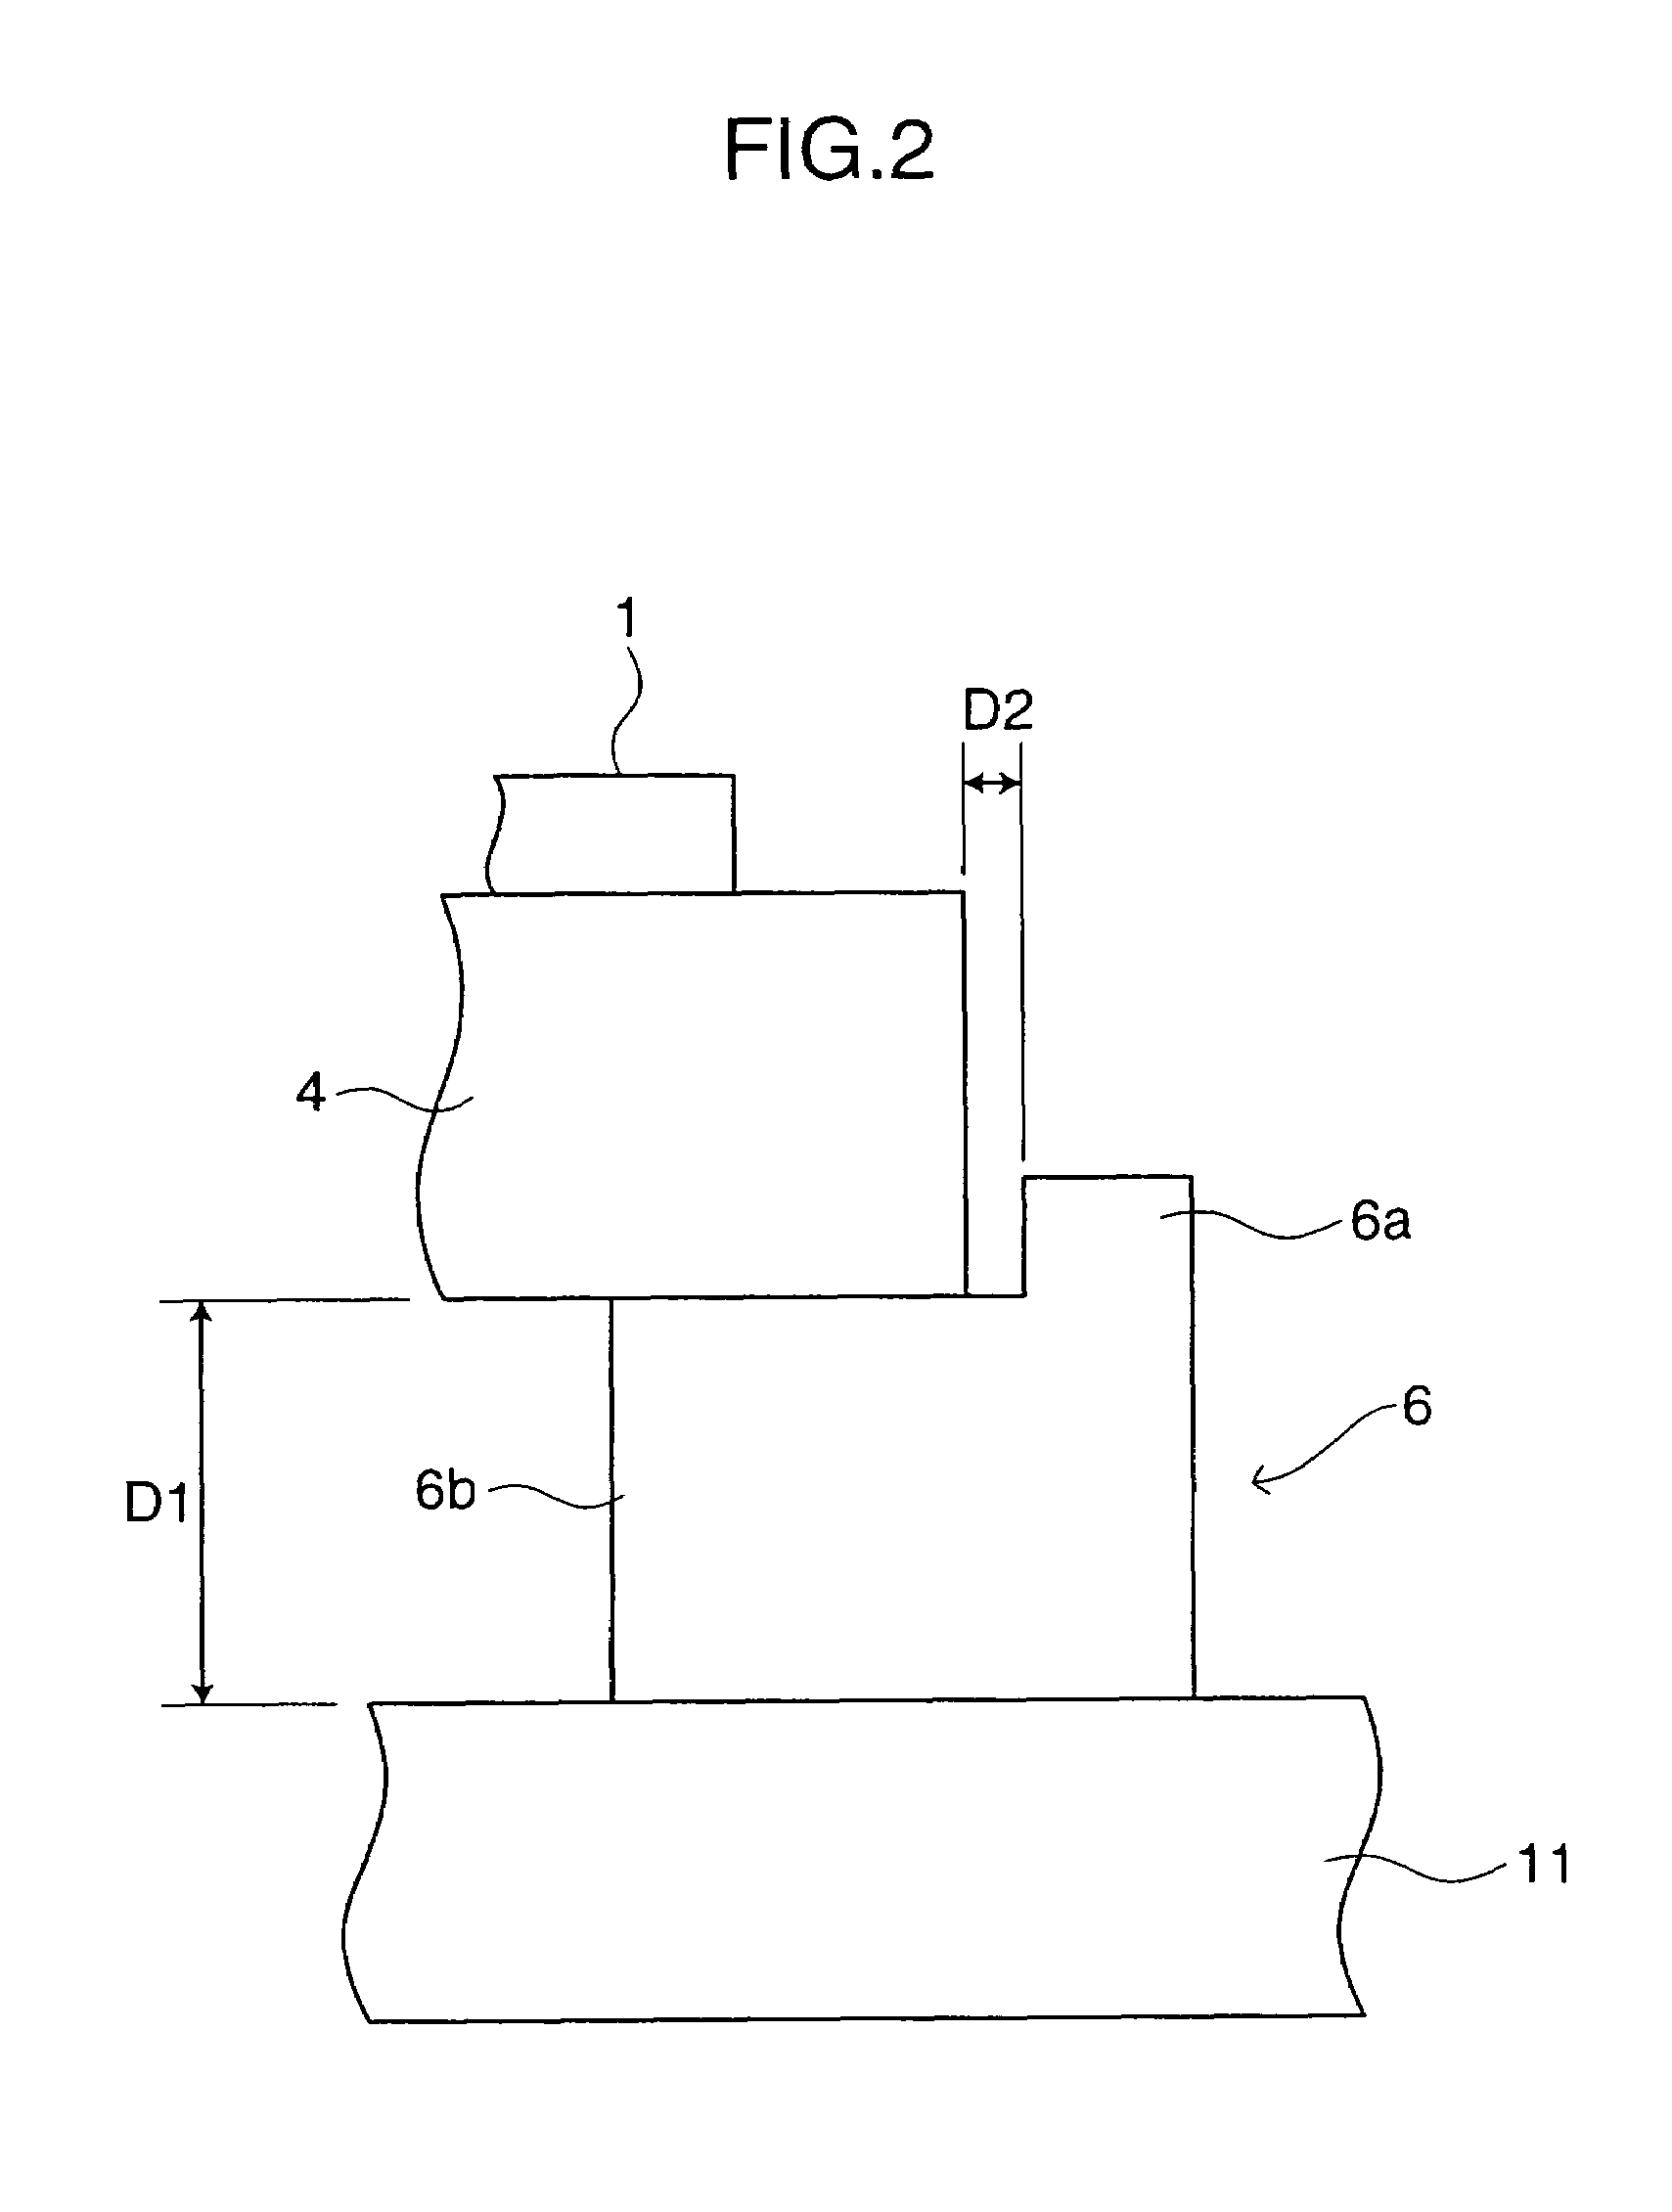 Thin film formation apparatus including engagement members for support during thermal expansion